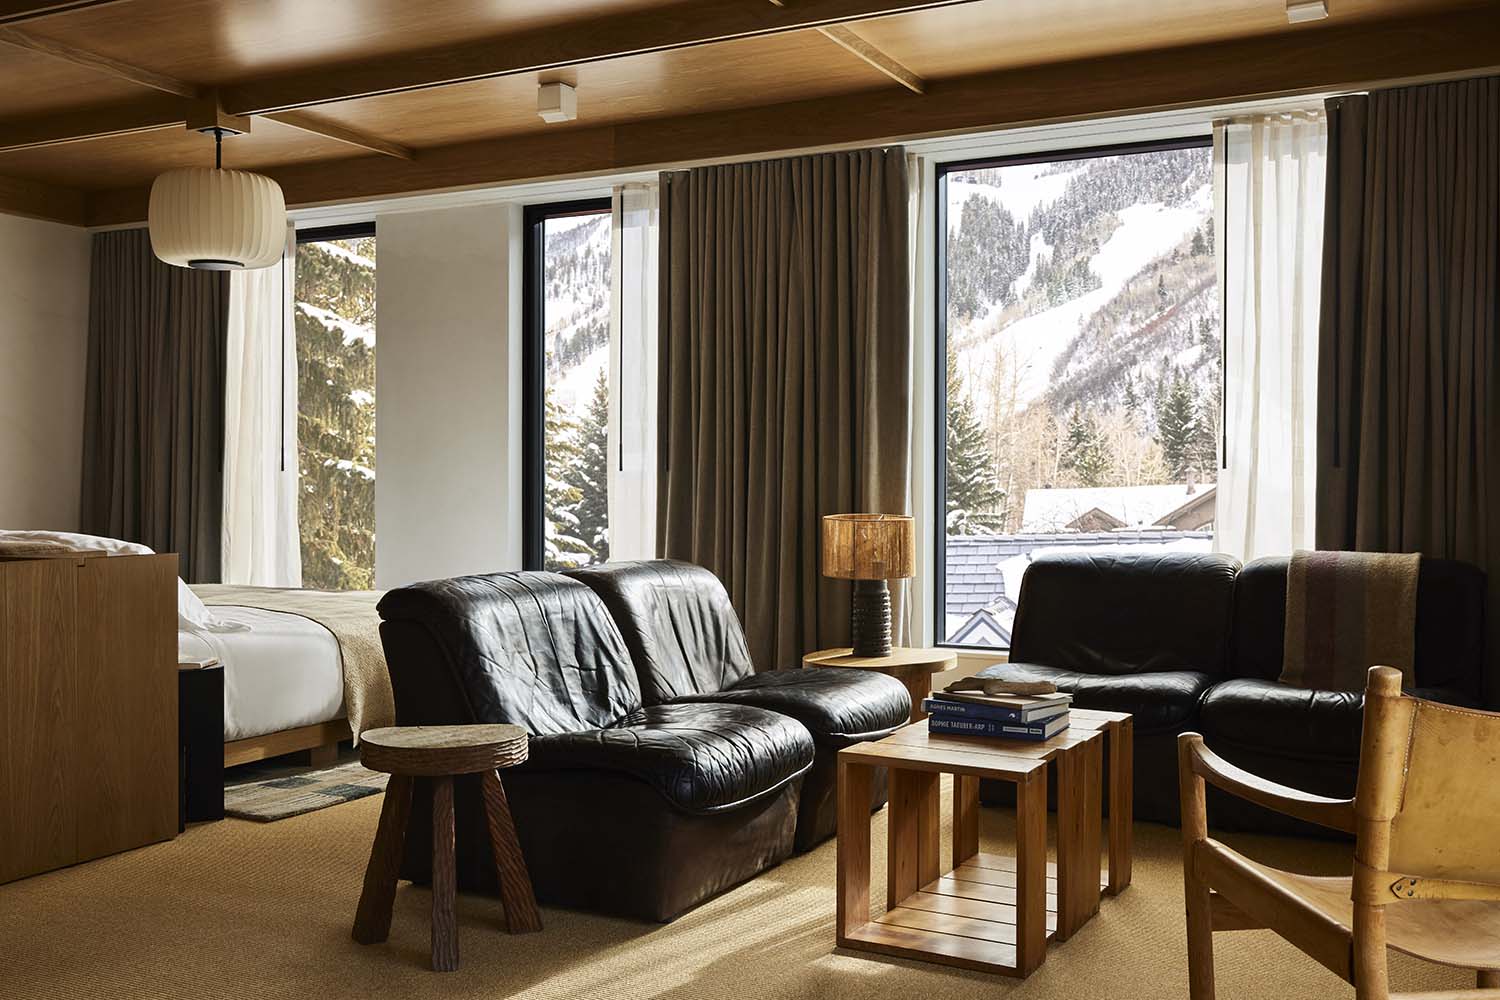 MOLLIE Aspen Design Hotel Colorado, CCY Architects and Post Company